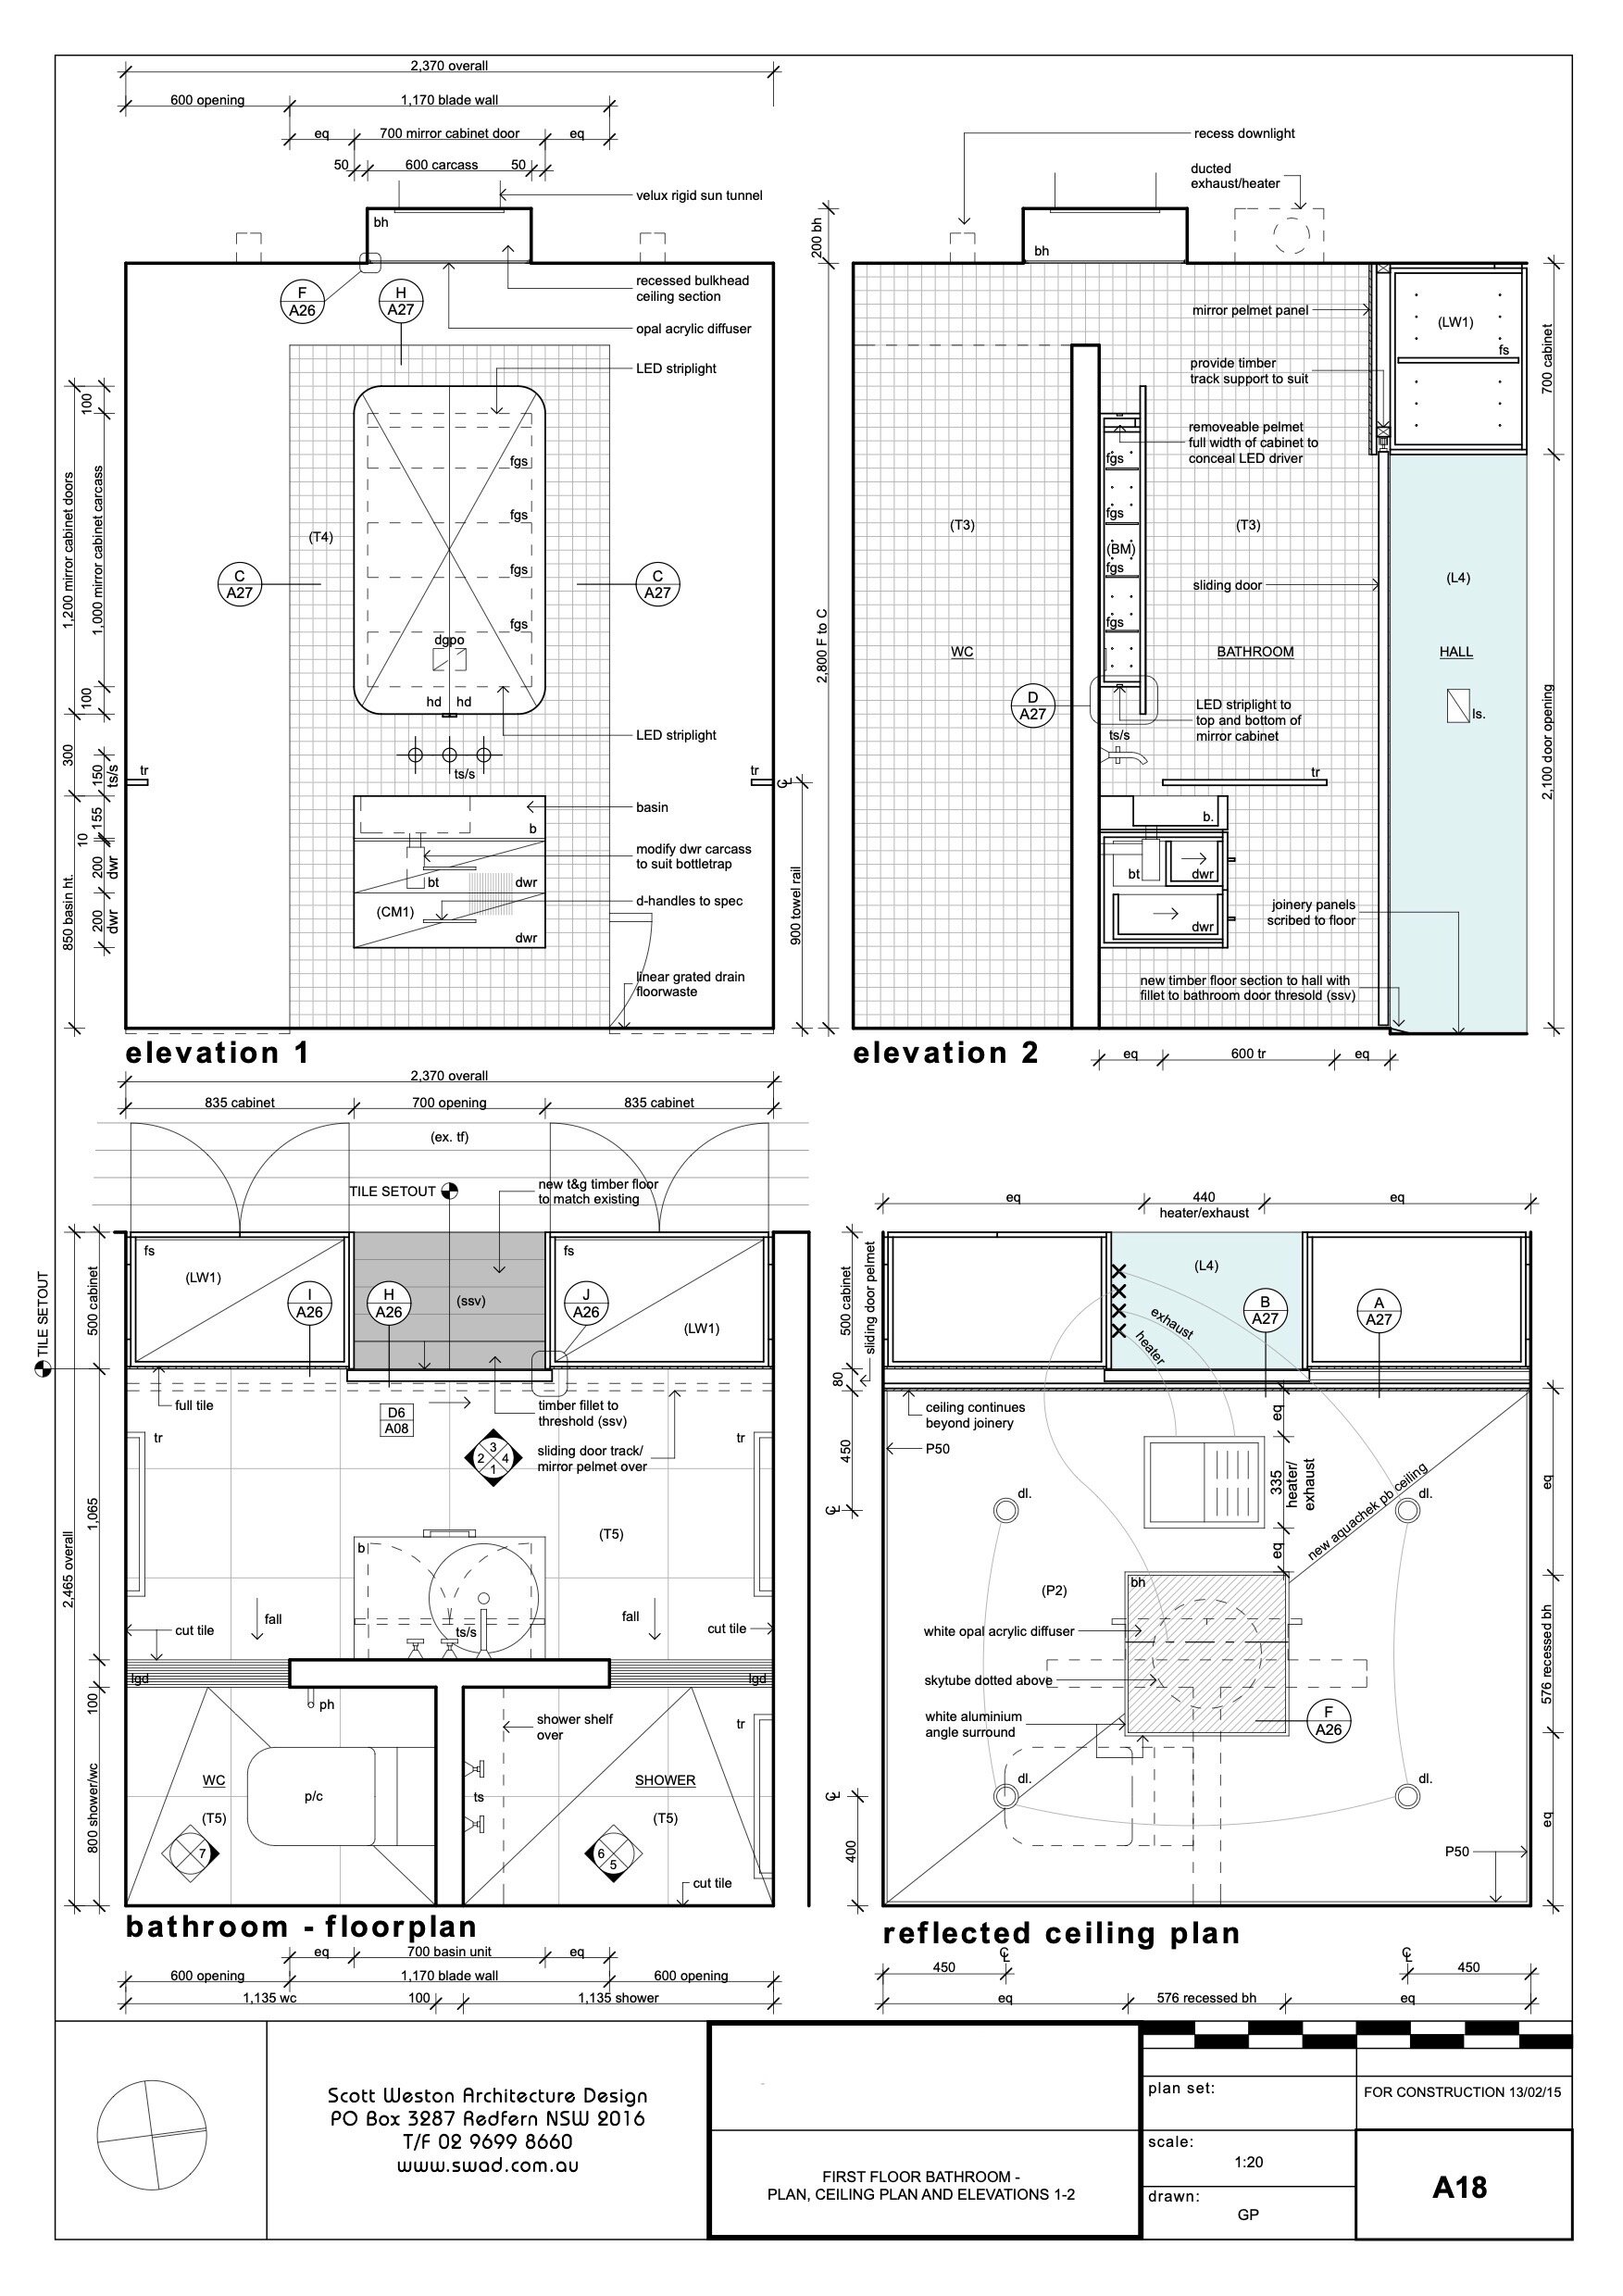 A18 FIRST FLOOR BATHROOM -                             PLAN, CEILING PLAN AND ELEVATIONS 1-2.jpeg